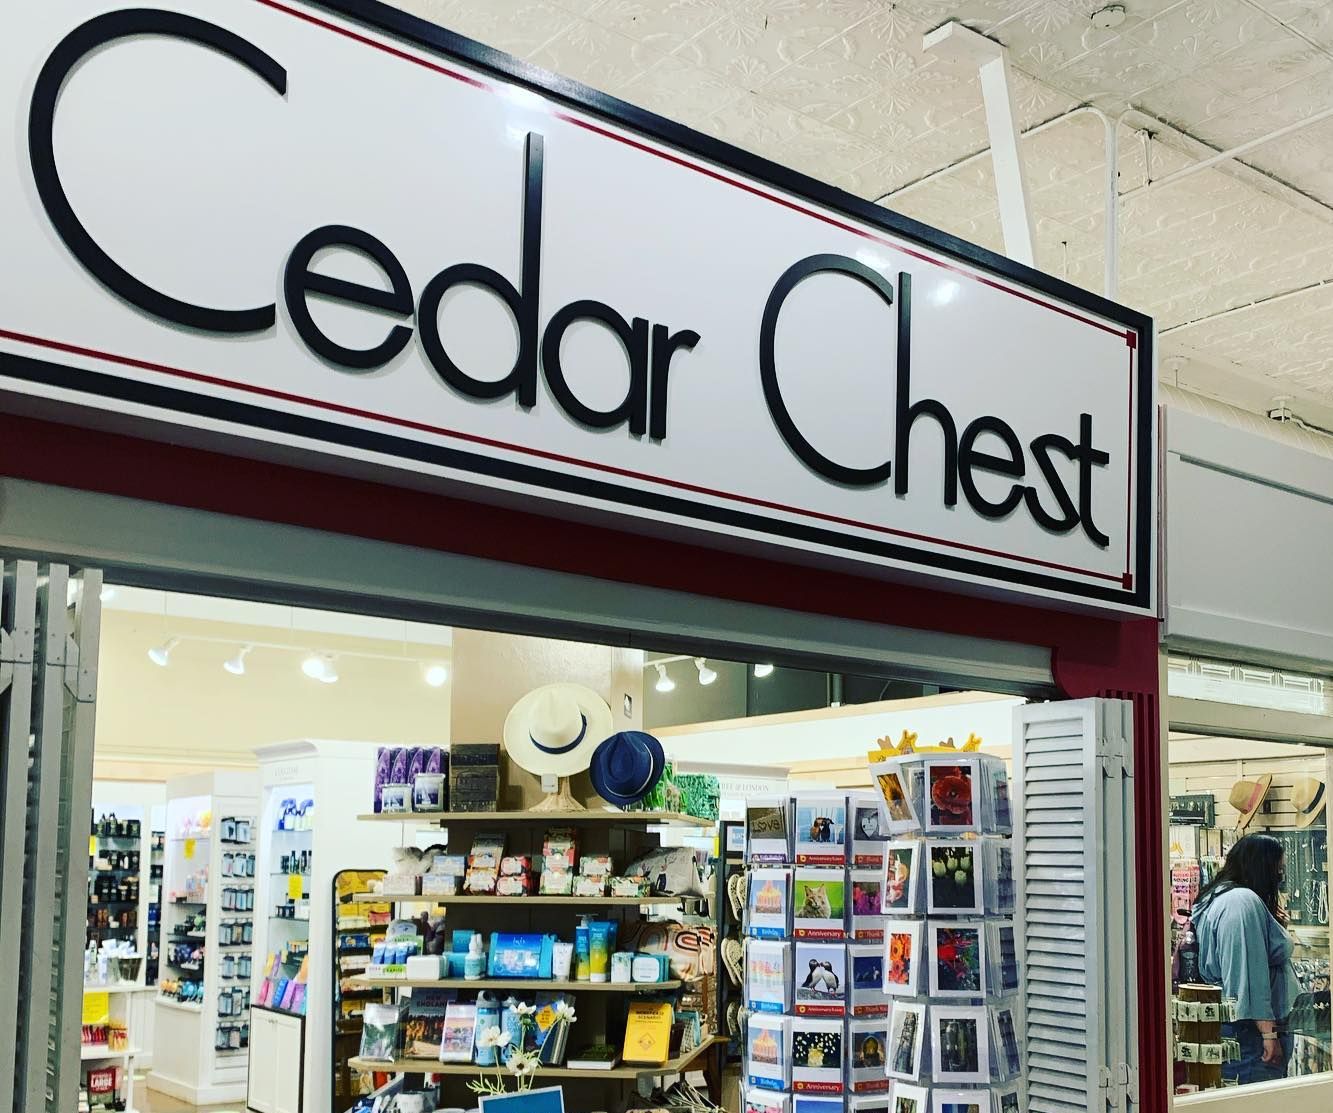 Cedar Chest has everything from soaps to clothing to accessories! Shop this delightful spot in Thornes Marketplace Northampton MA.